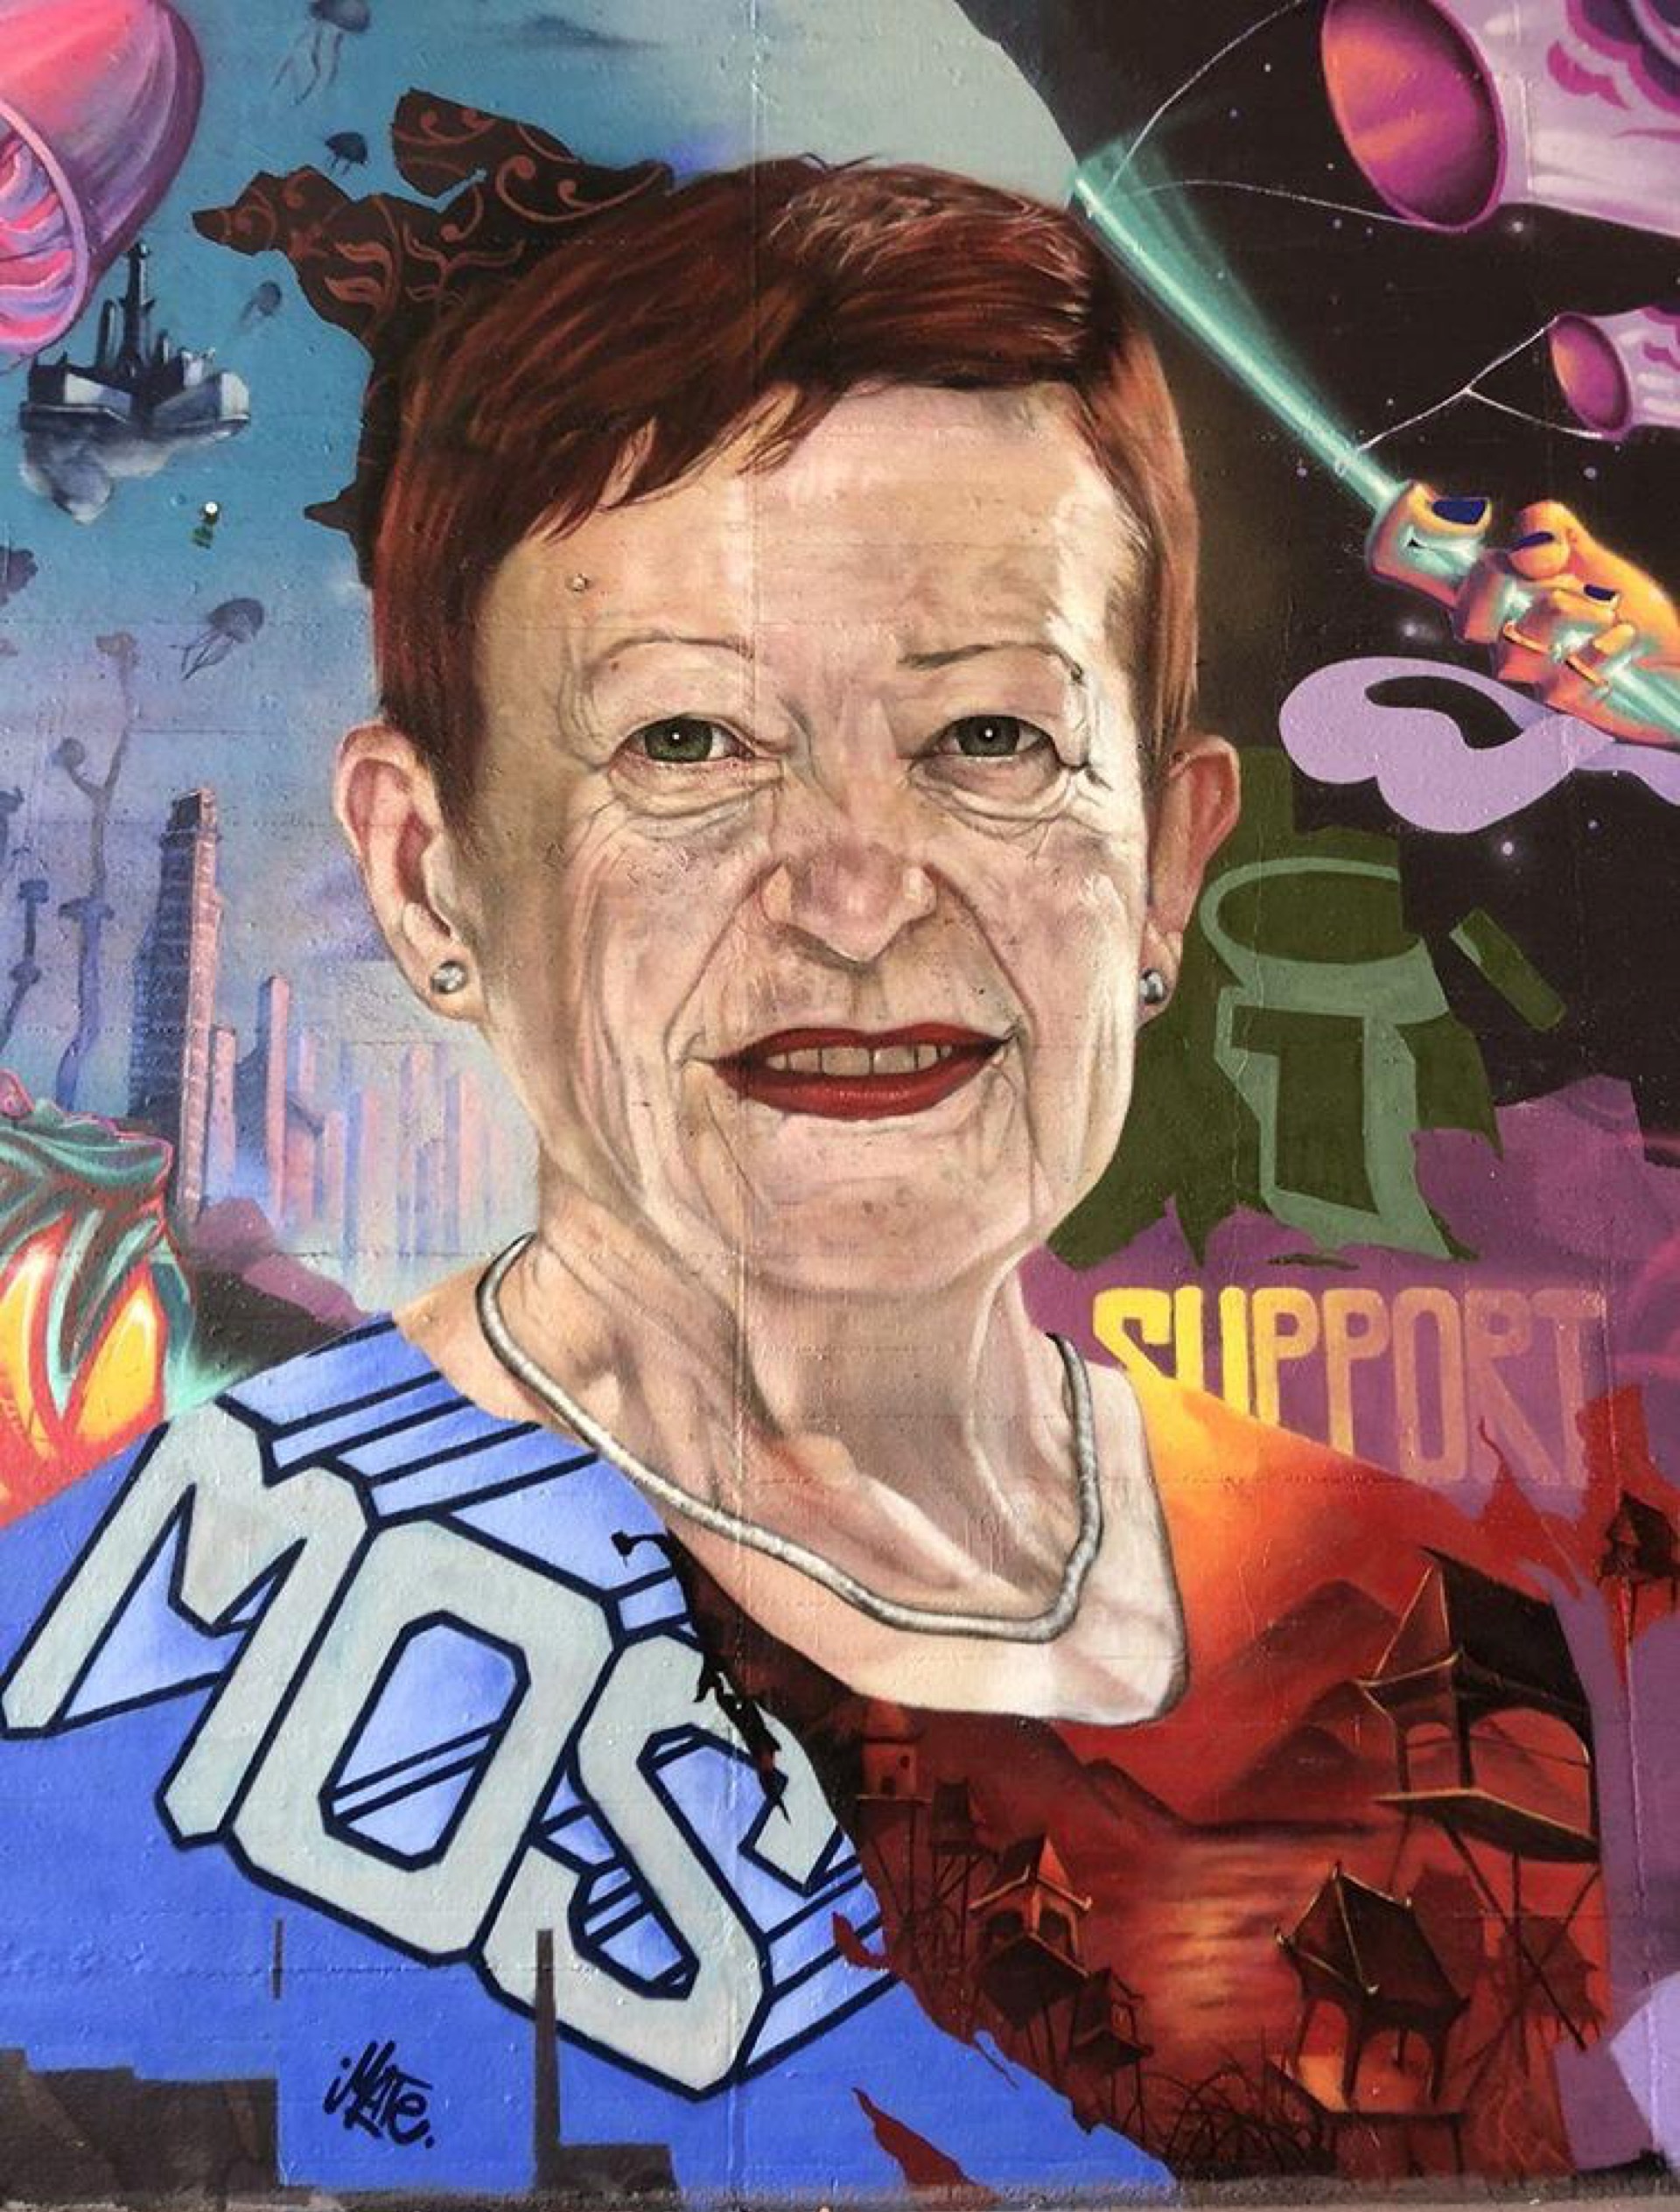 I support MOS - Meeting of Styles Wiesbaden, 2019